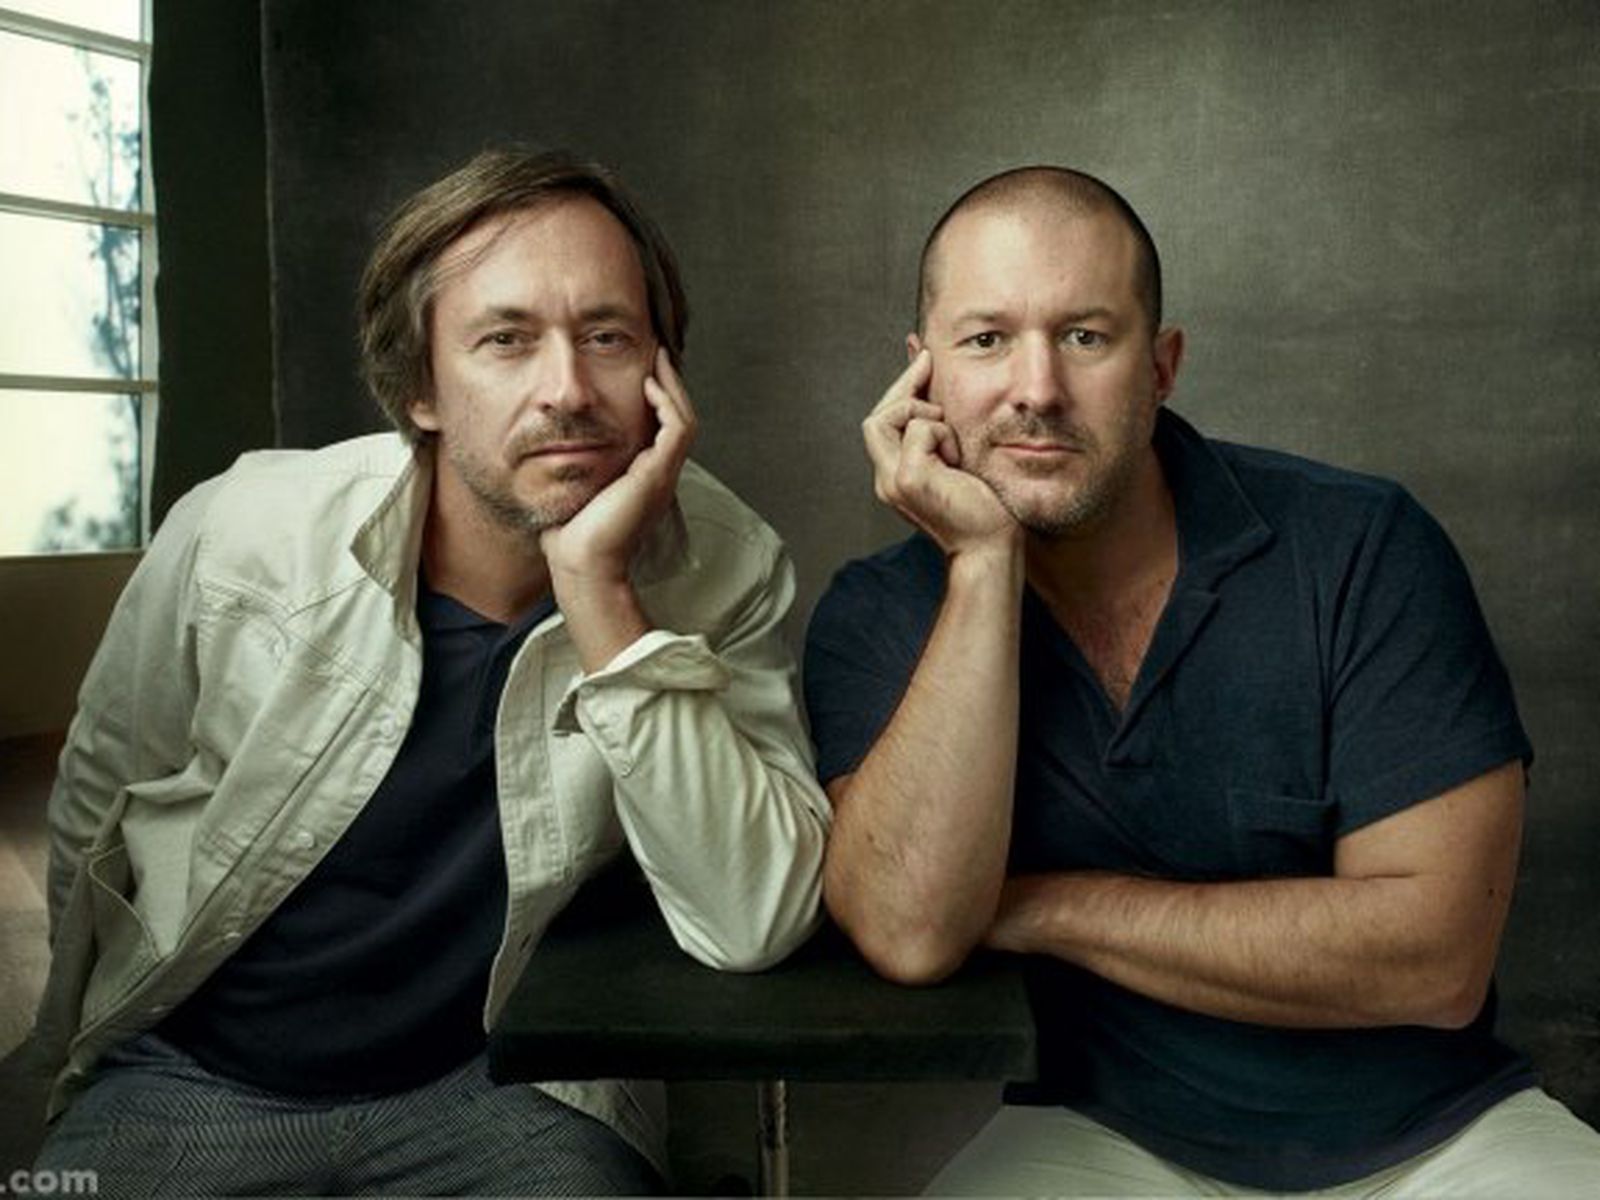 Apple hires superstar designer Marc Newson, to work with personal